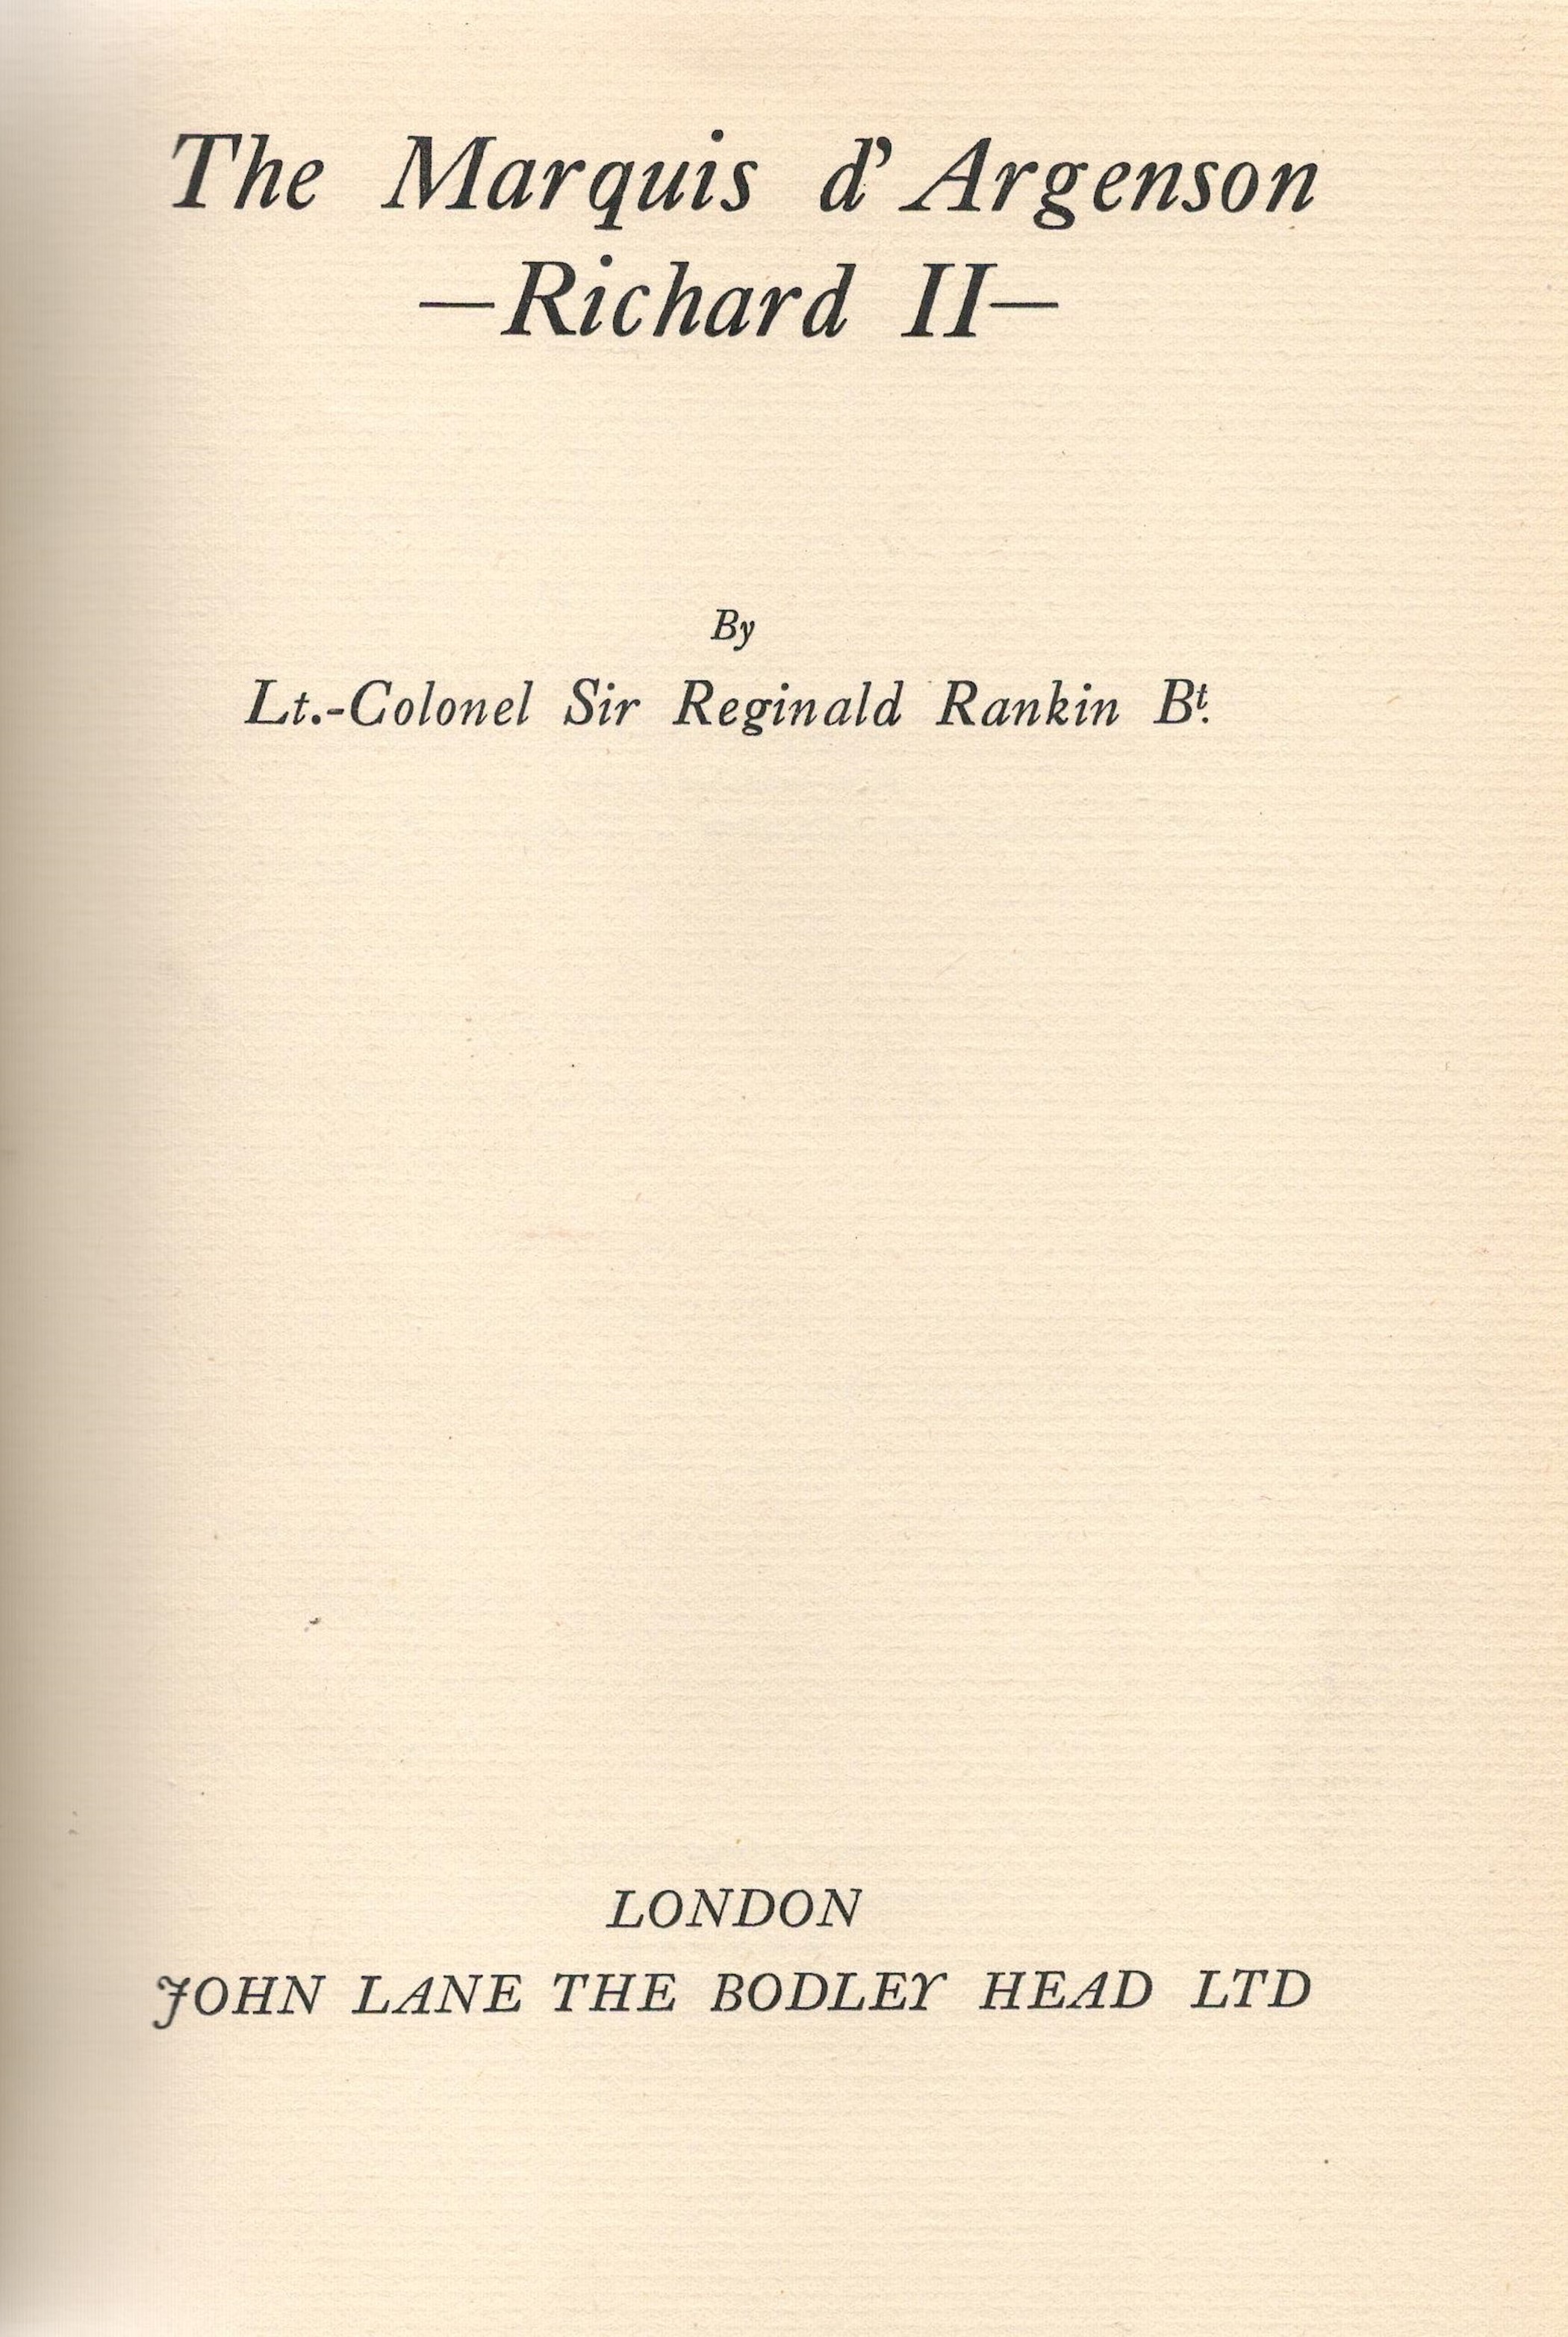 The Marquis D'Argenson Richard II by Lt Col Sir Reginald Rankin Hardback Book 1931 Collected Edition